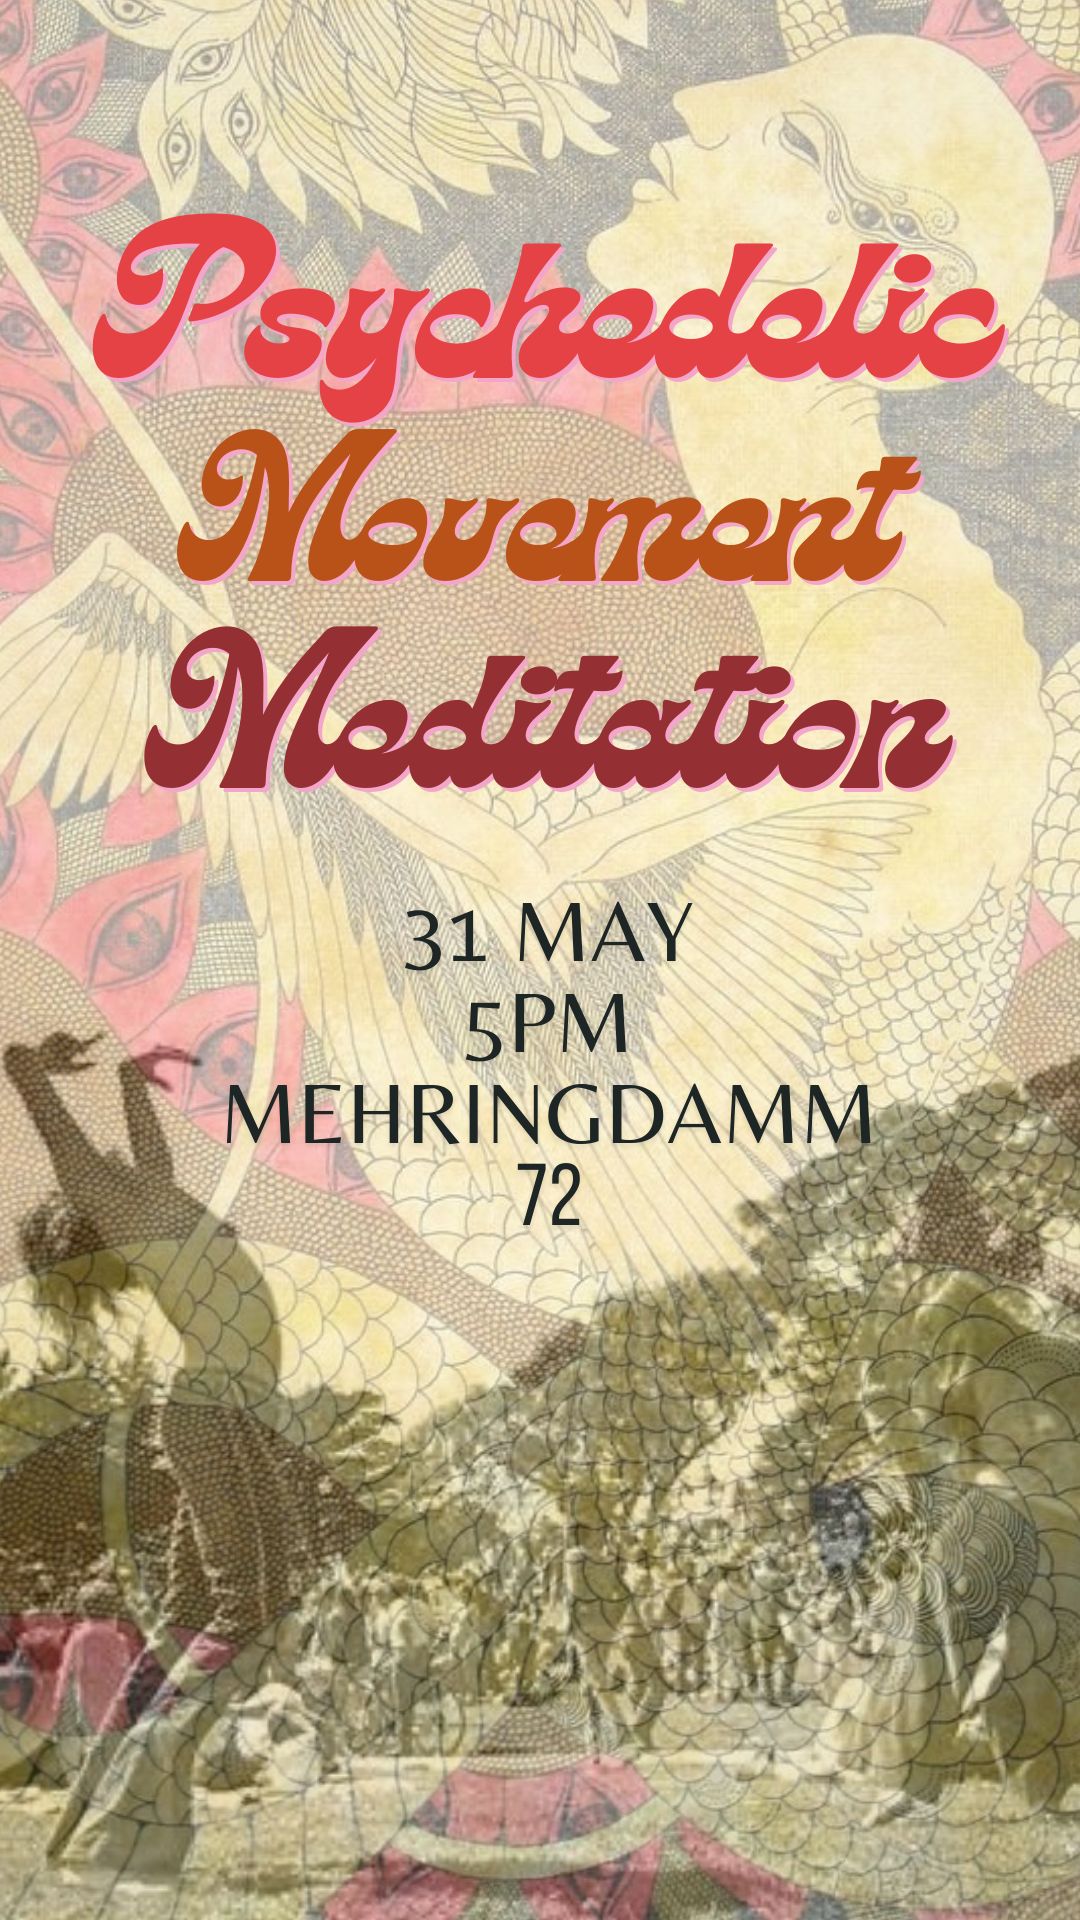 !!!! EVENT !!!  Psychedelic Movement Meditation